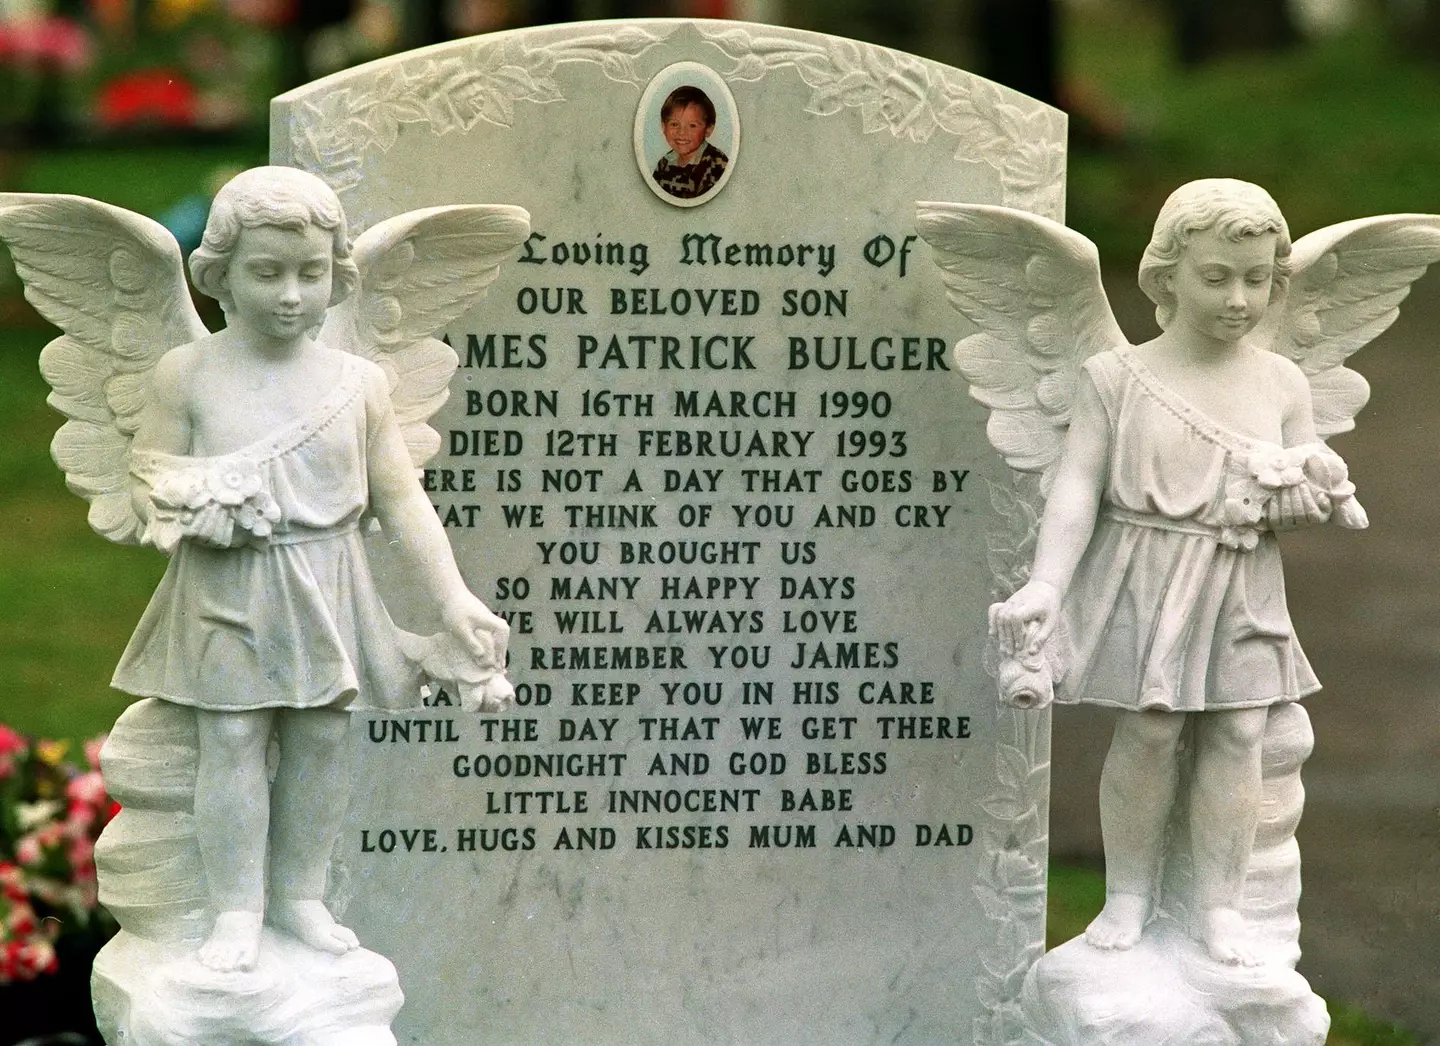 James Bulger was murdered 30 years ago by Jon Venables and Robert Thompson.